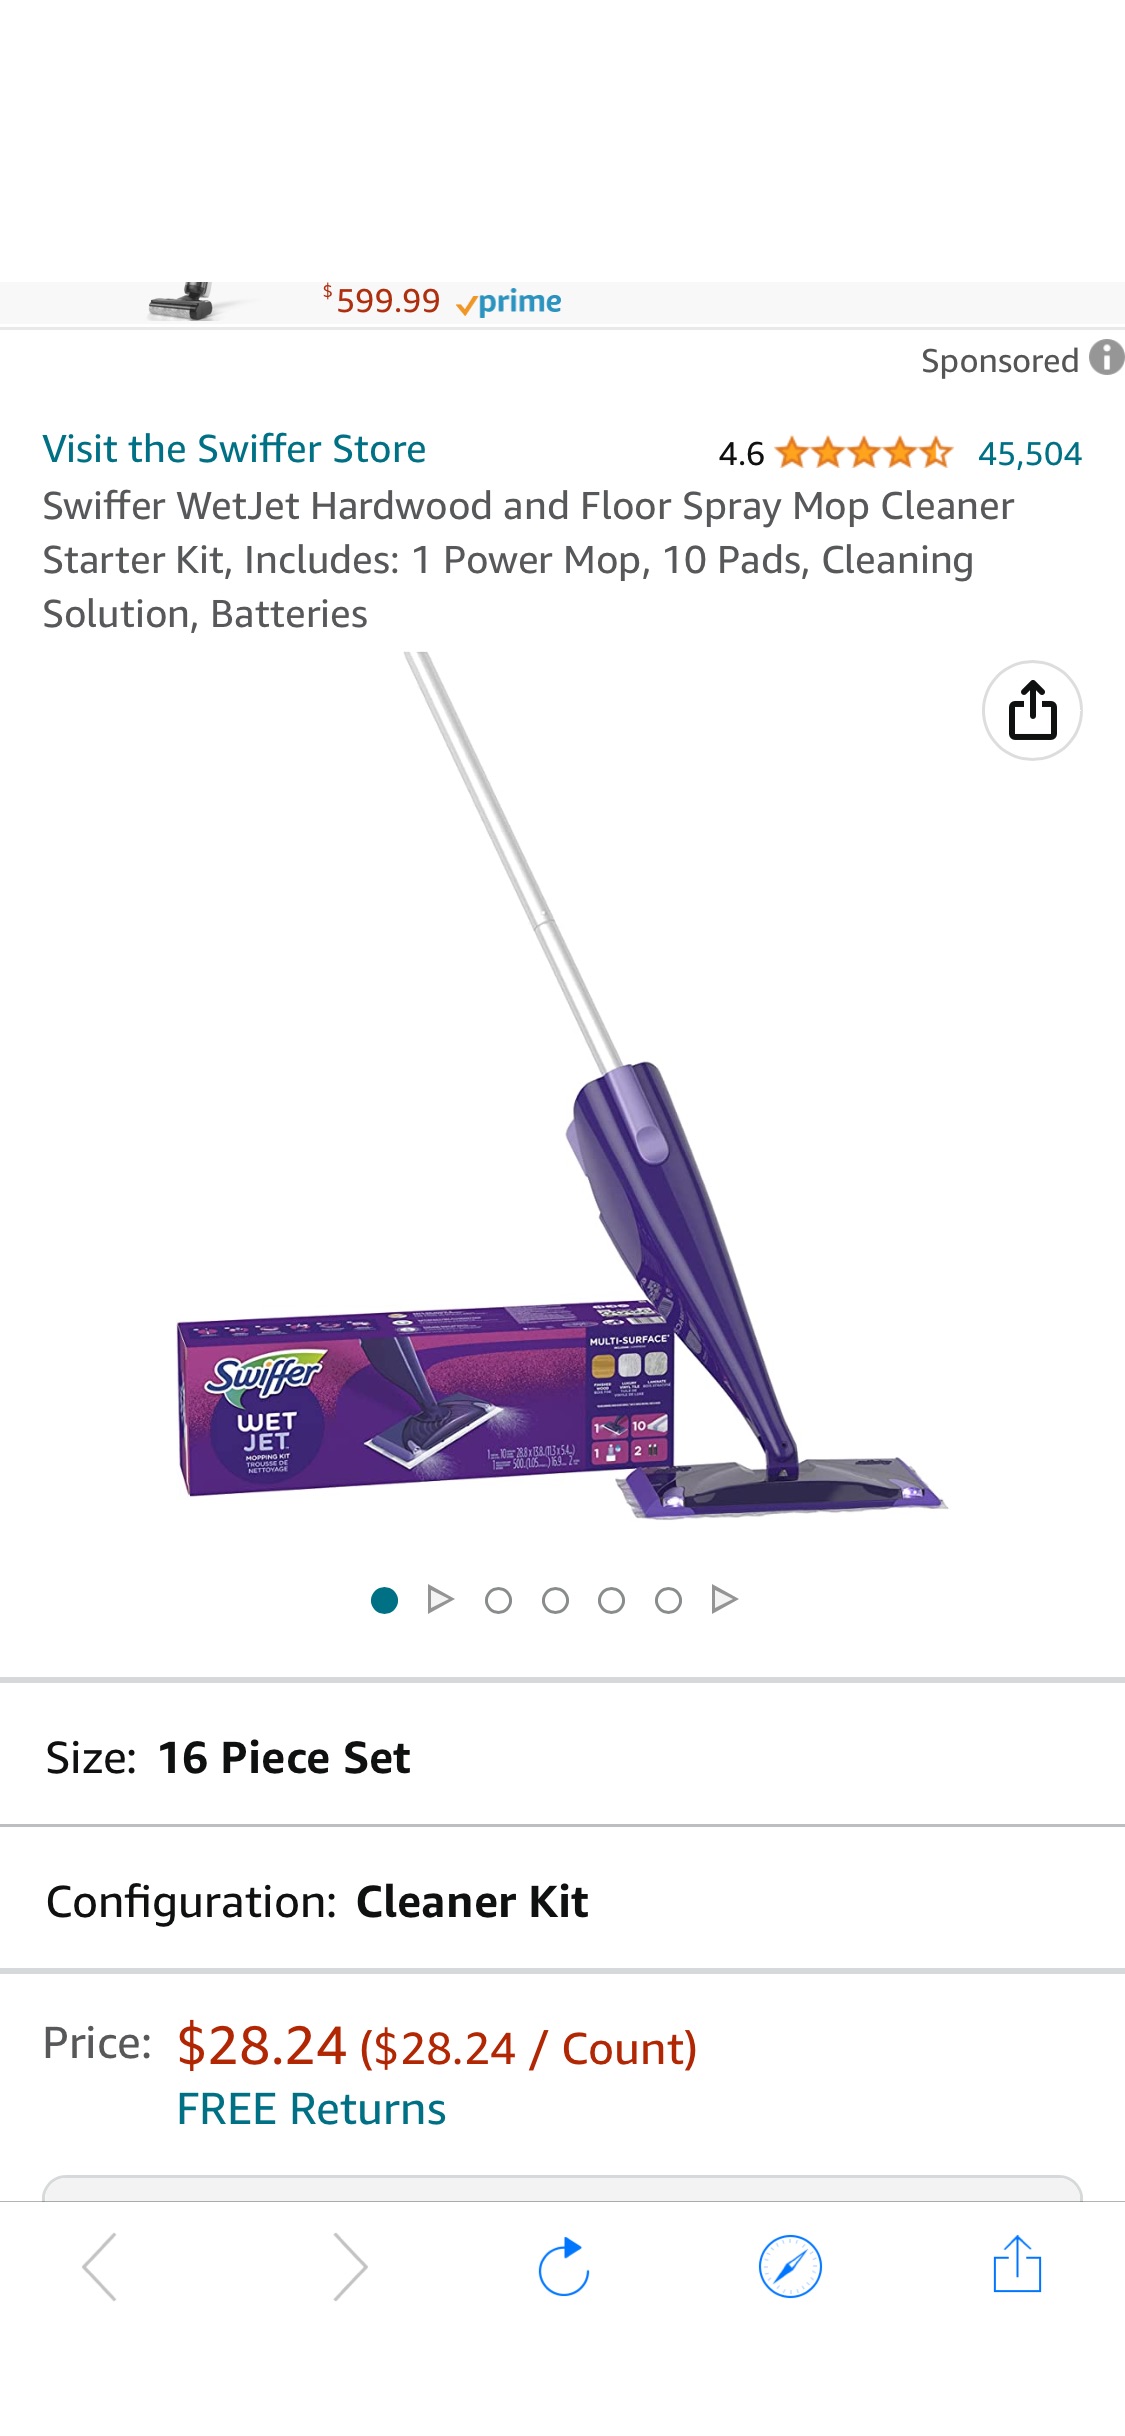 Amazon.com: Swiffer WetJet Hardwood and Floor Spray Mop Cleaner Starter Kit, Includes: 1 Power Mop, 10 Pads, Cleaning Solution, Batteries : Health & Household